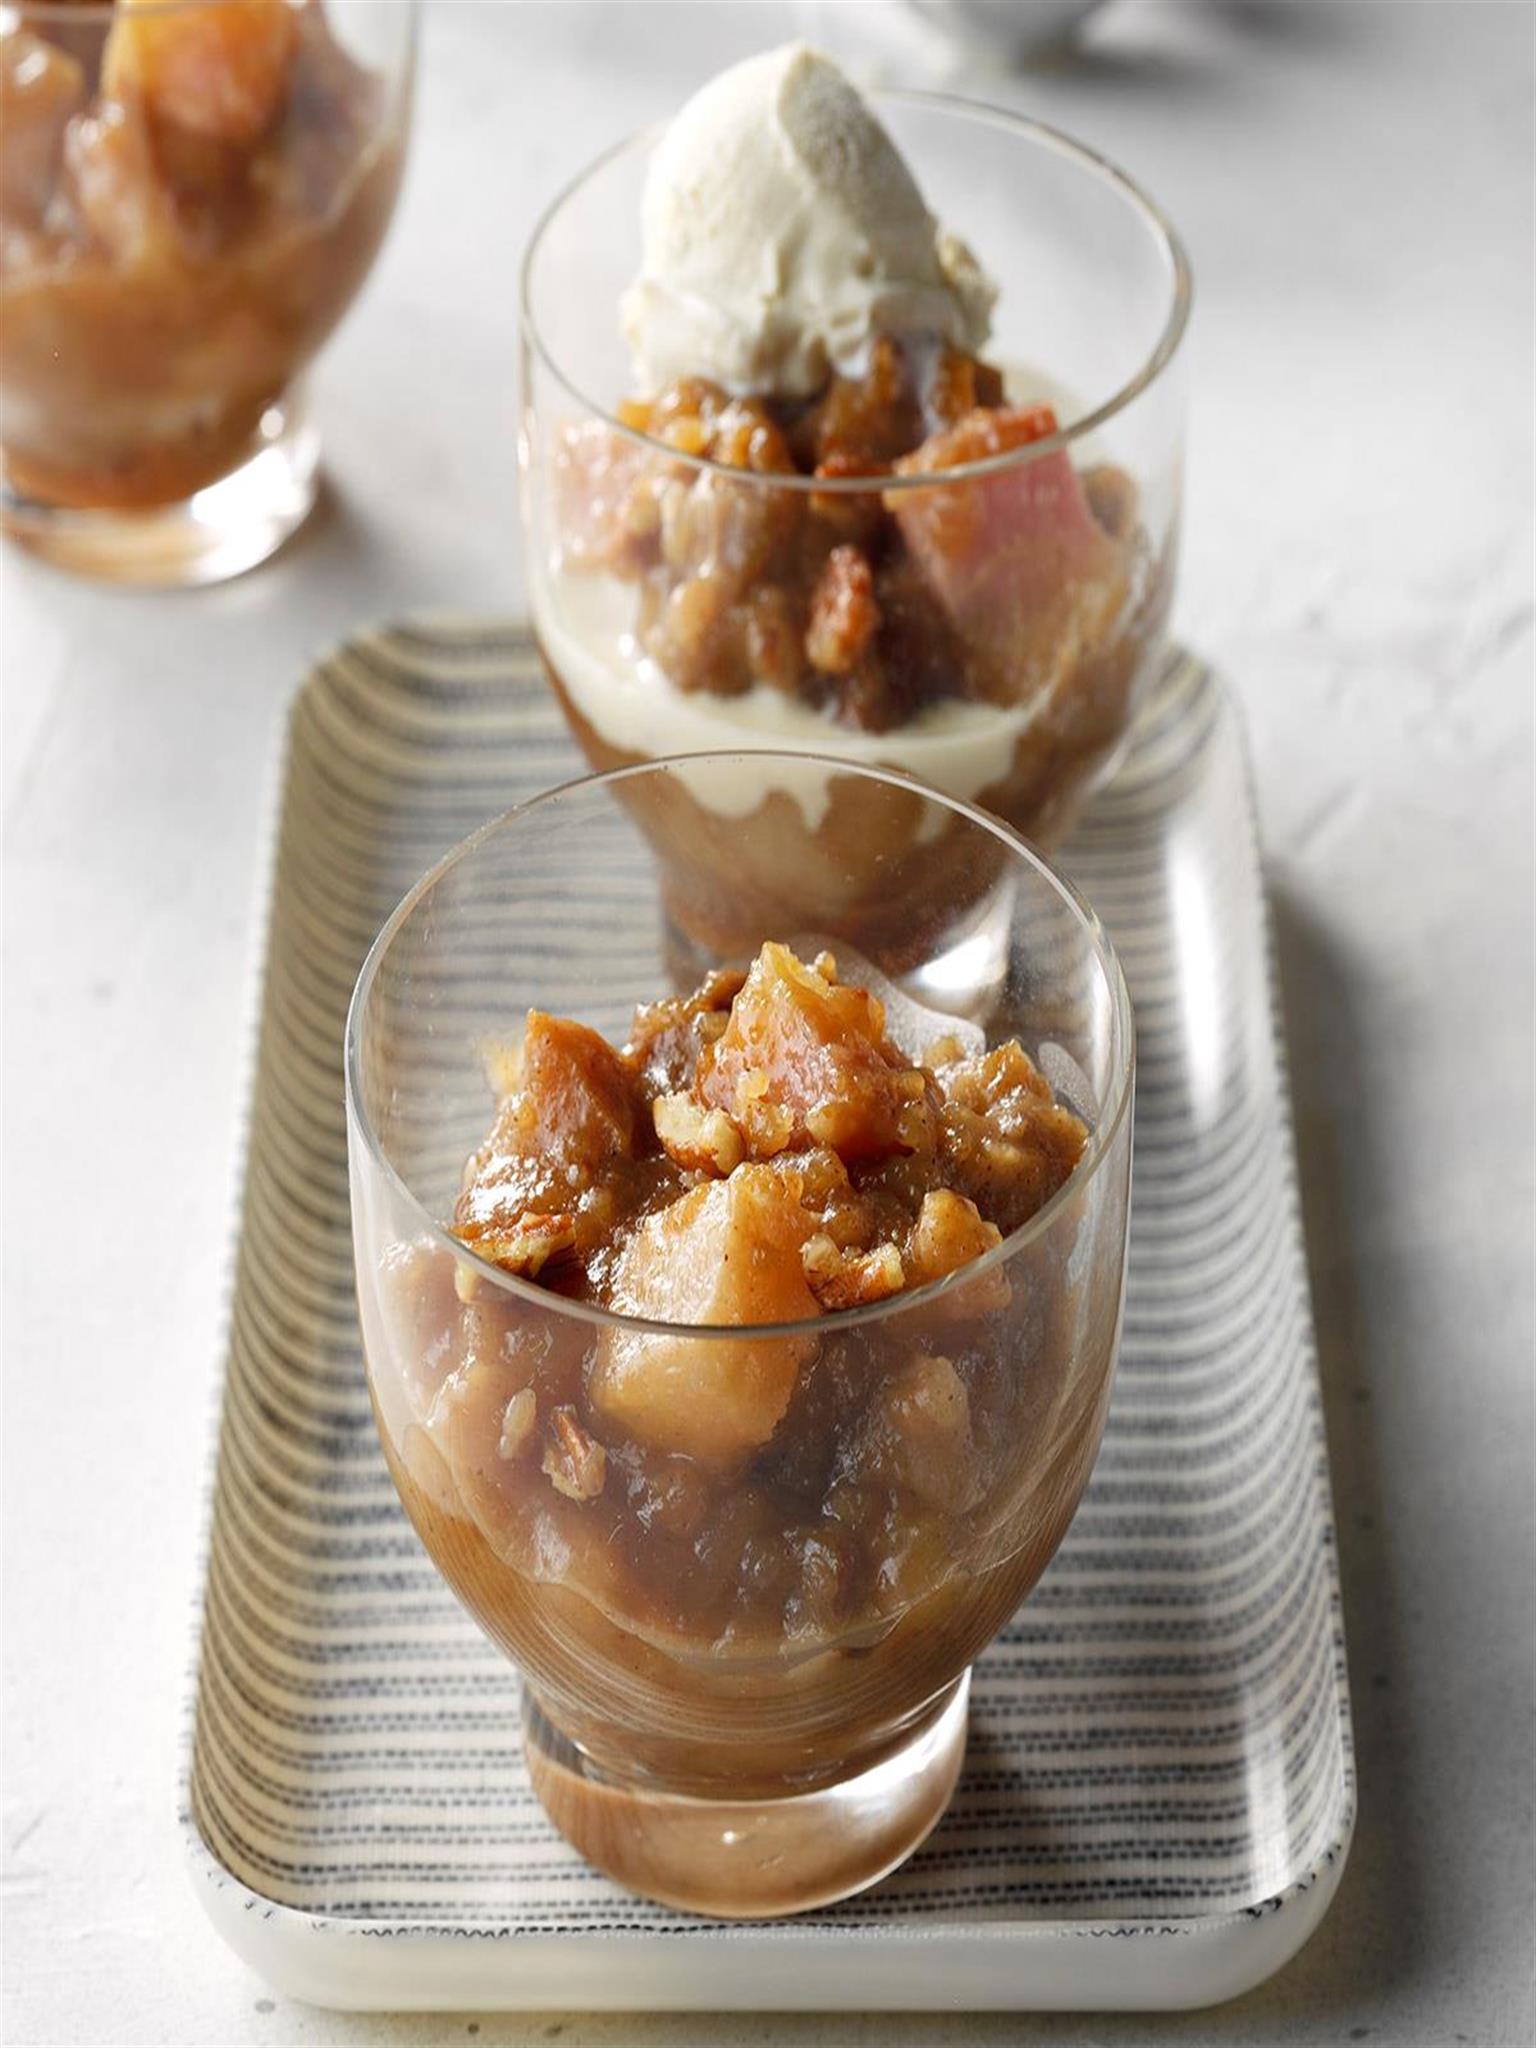 Ginger Pear Pudding Cakes | A Small Batch Fall Dessert